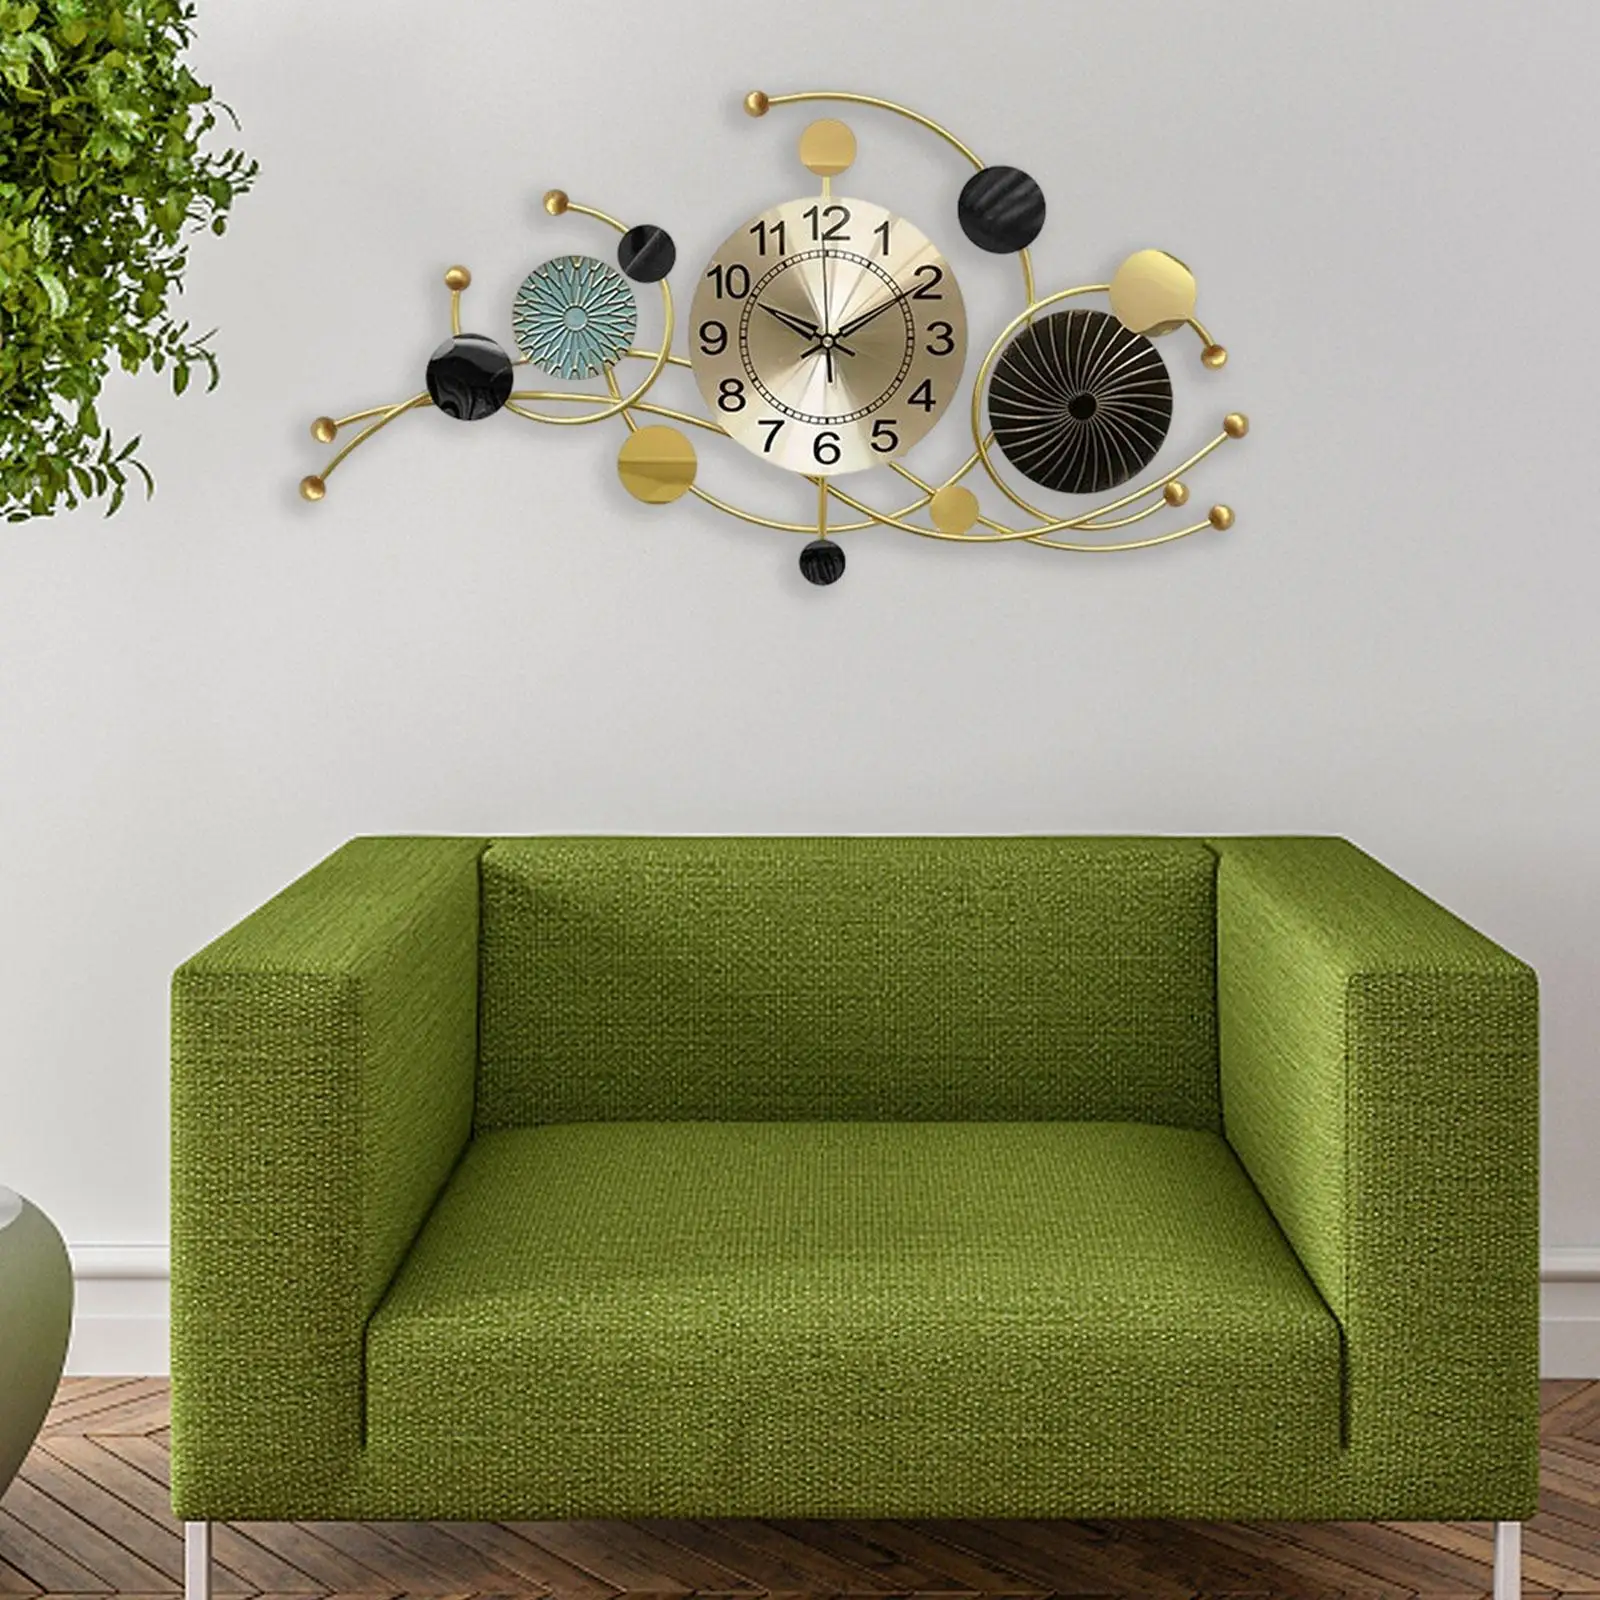 Large Wall Clock Silent Nonticking Metal Dial for Office Hotel Decoration